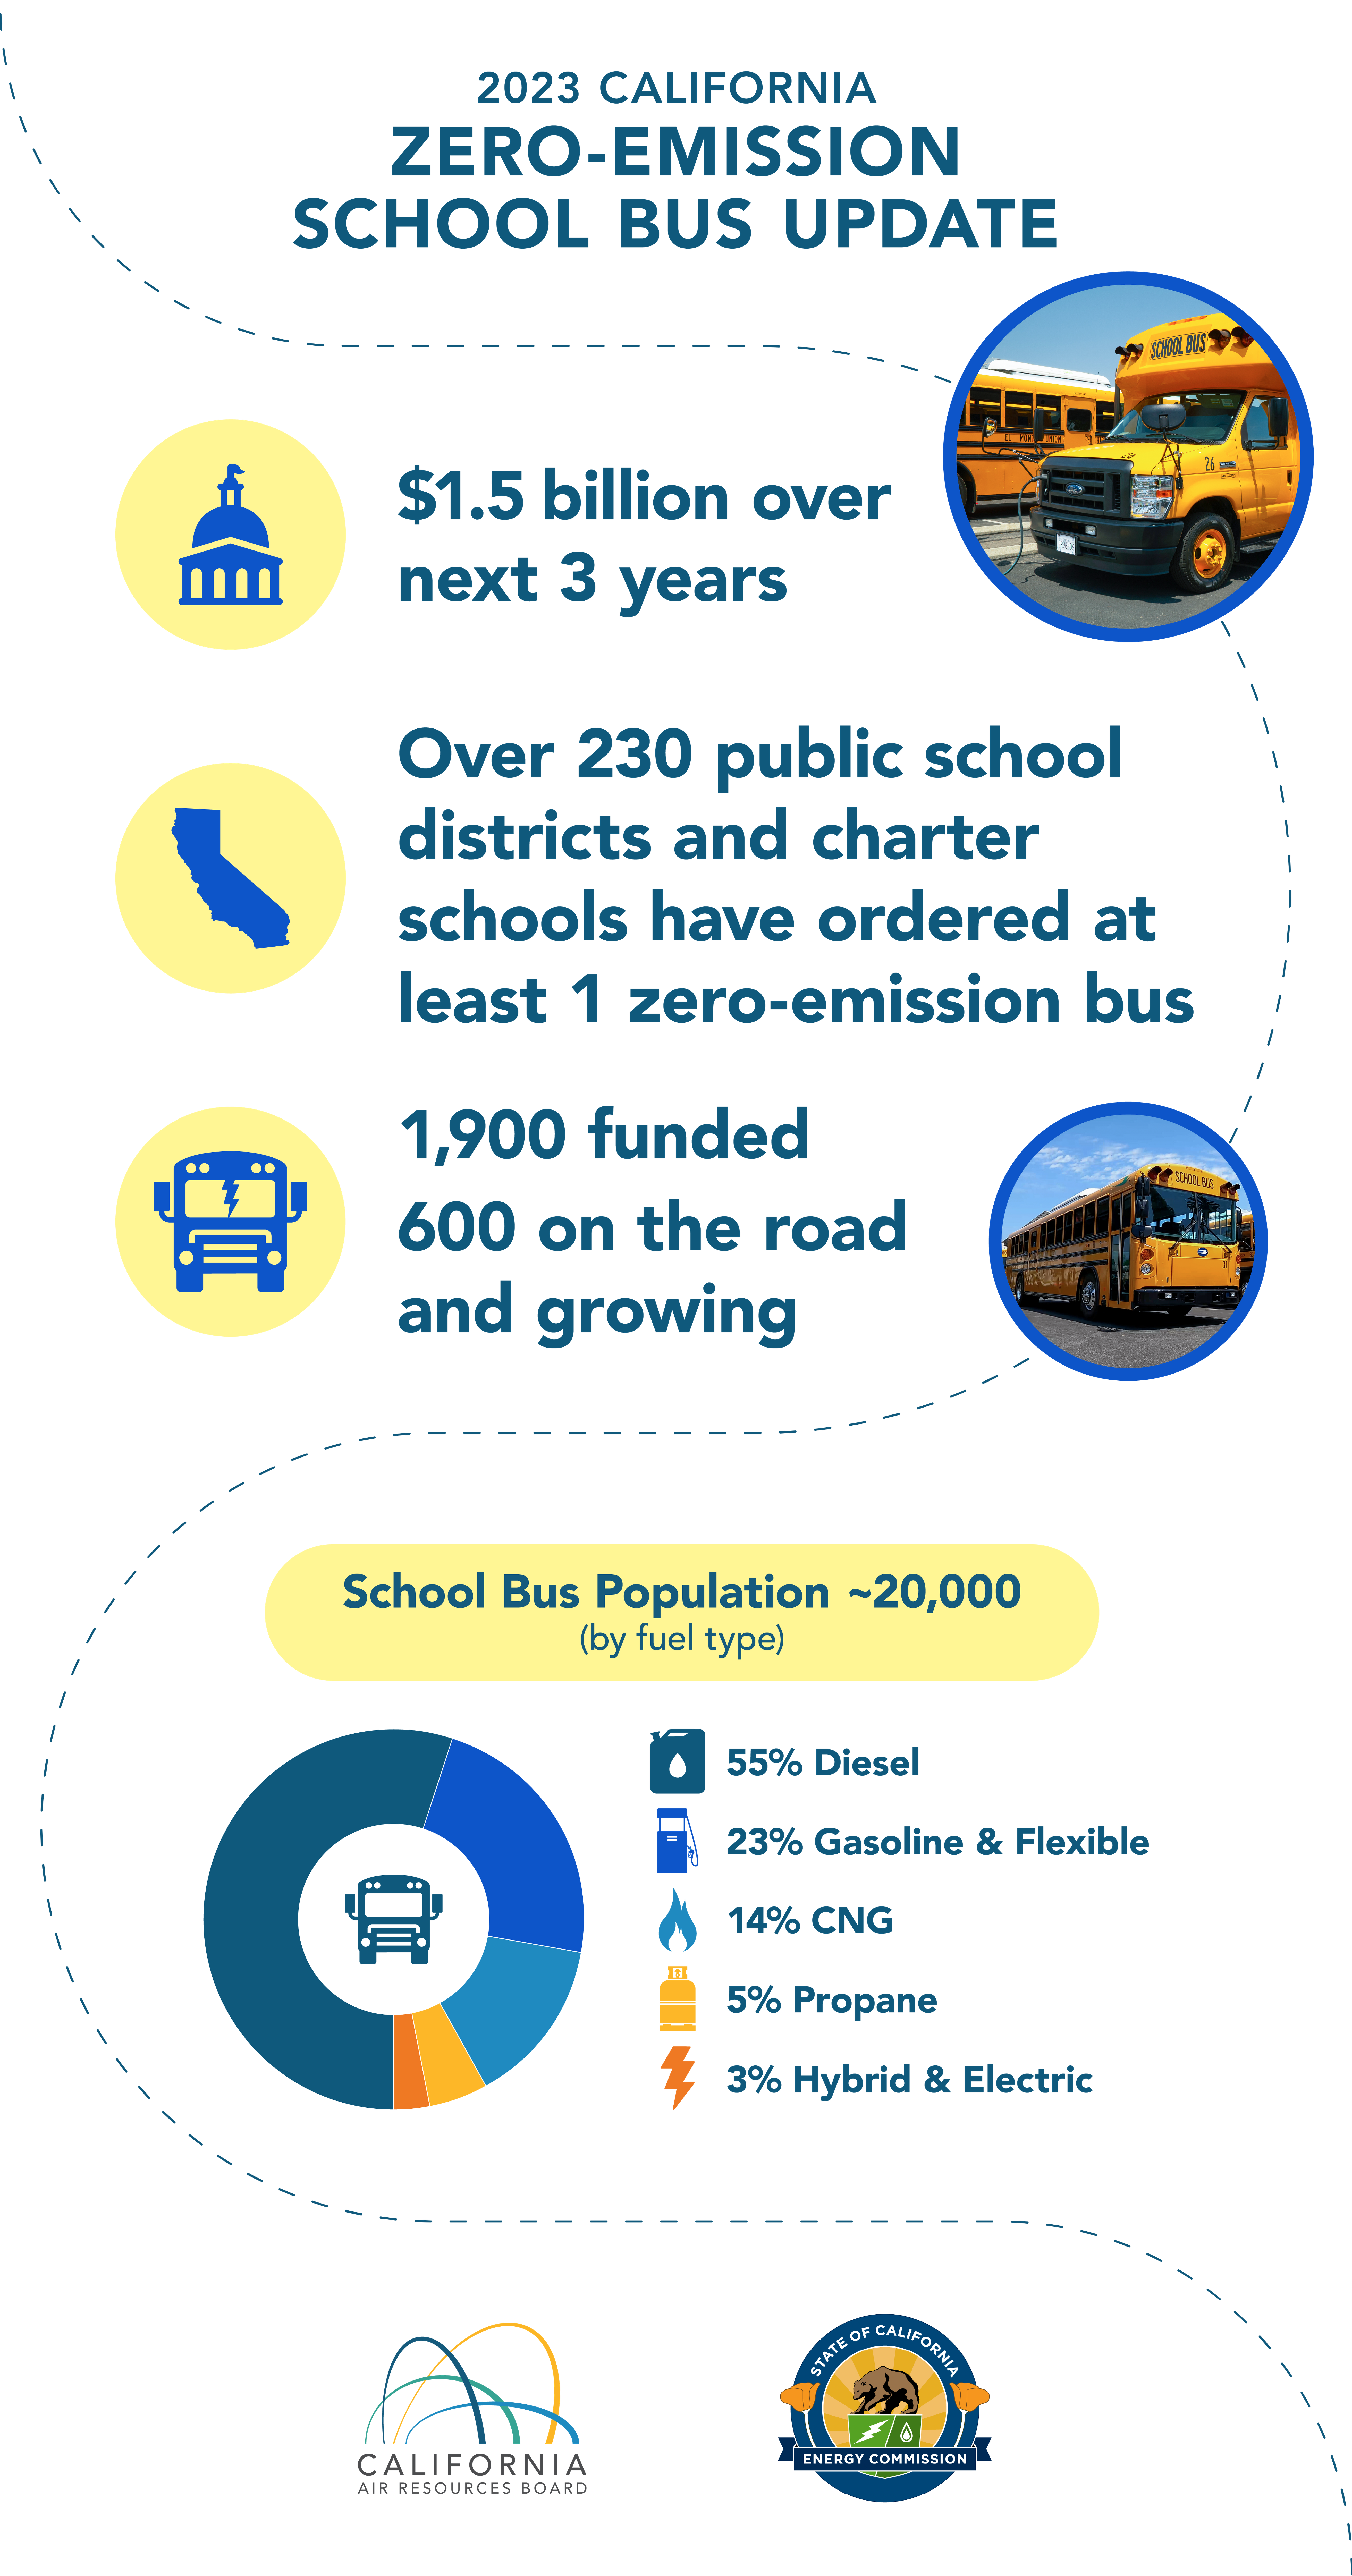 Infographic summarizing 2023 school bus incentives and deployments